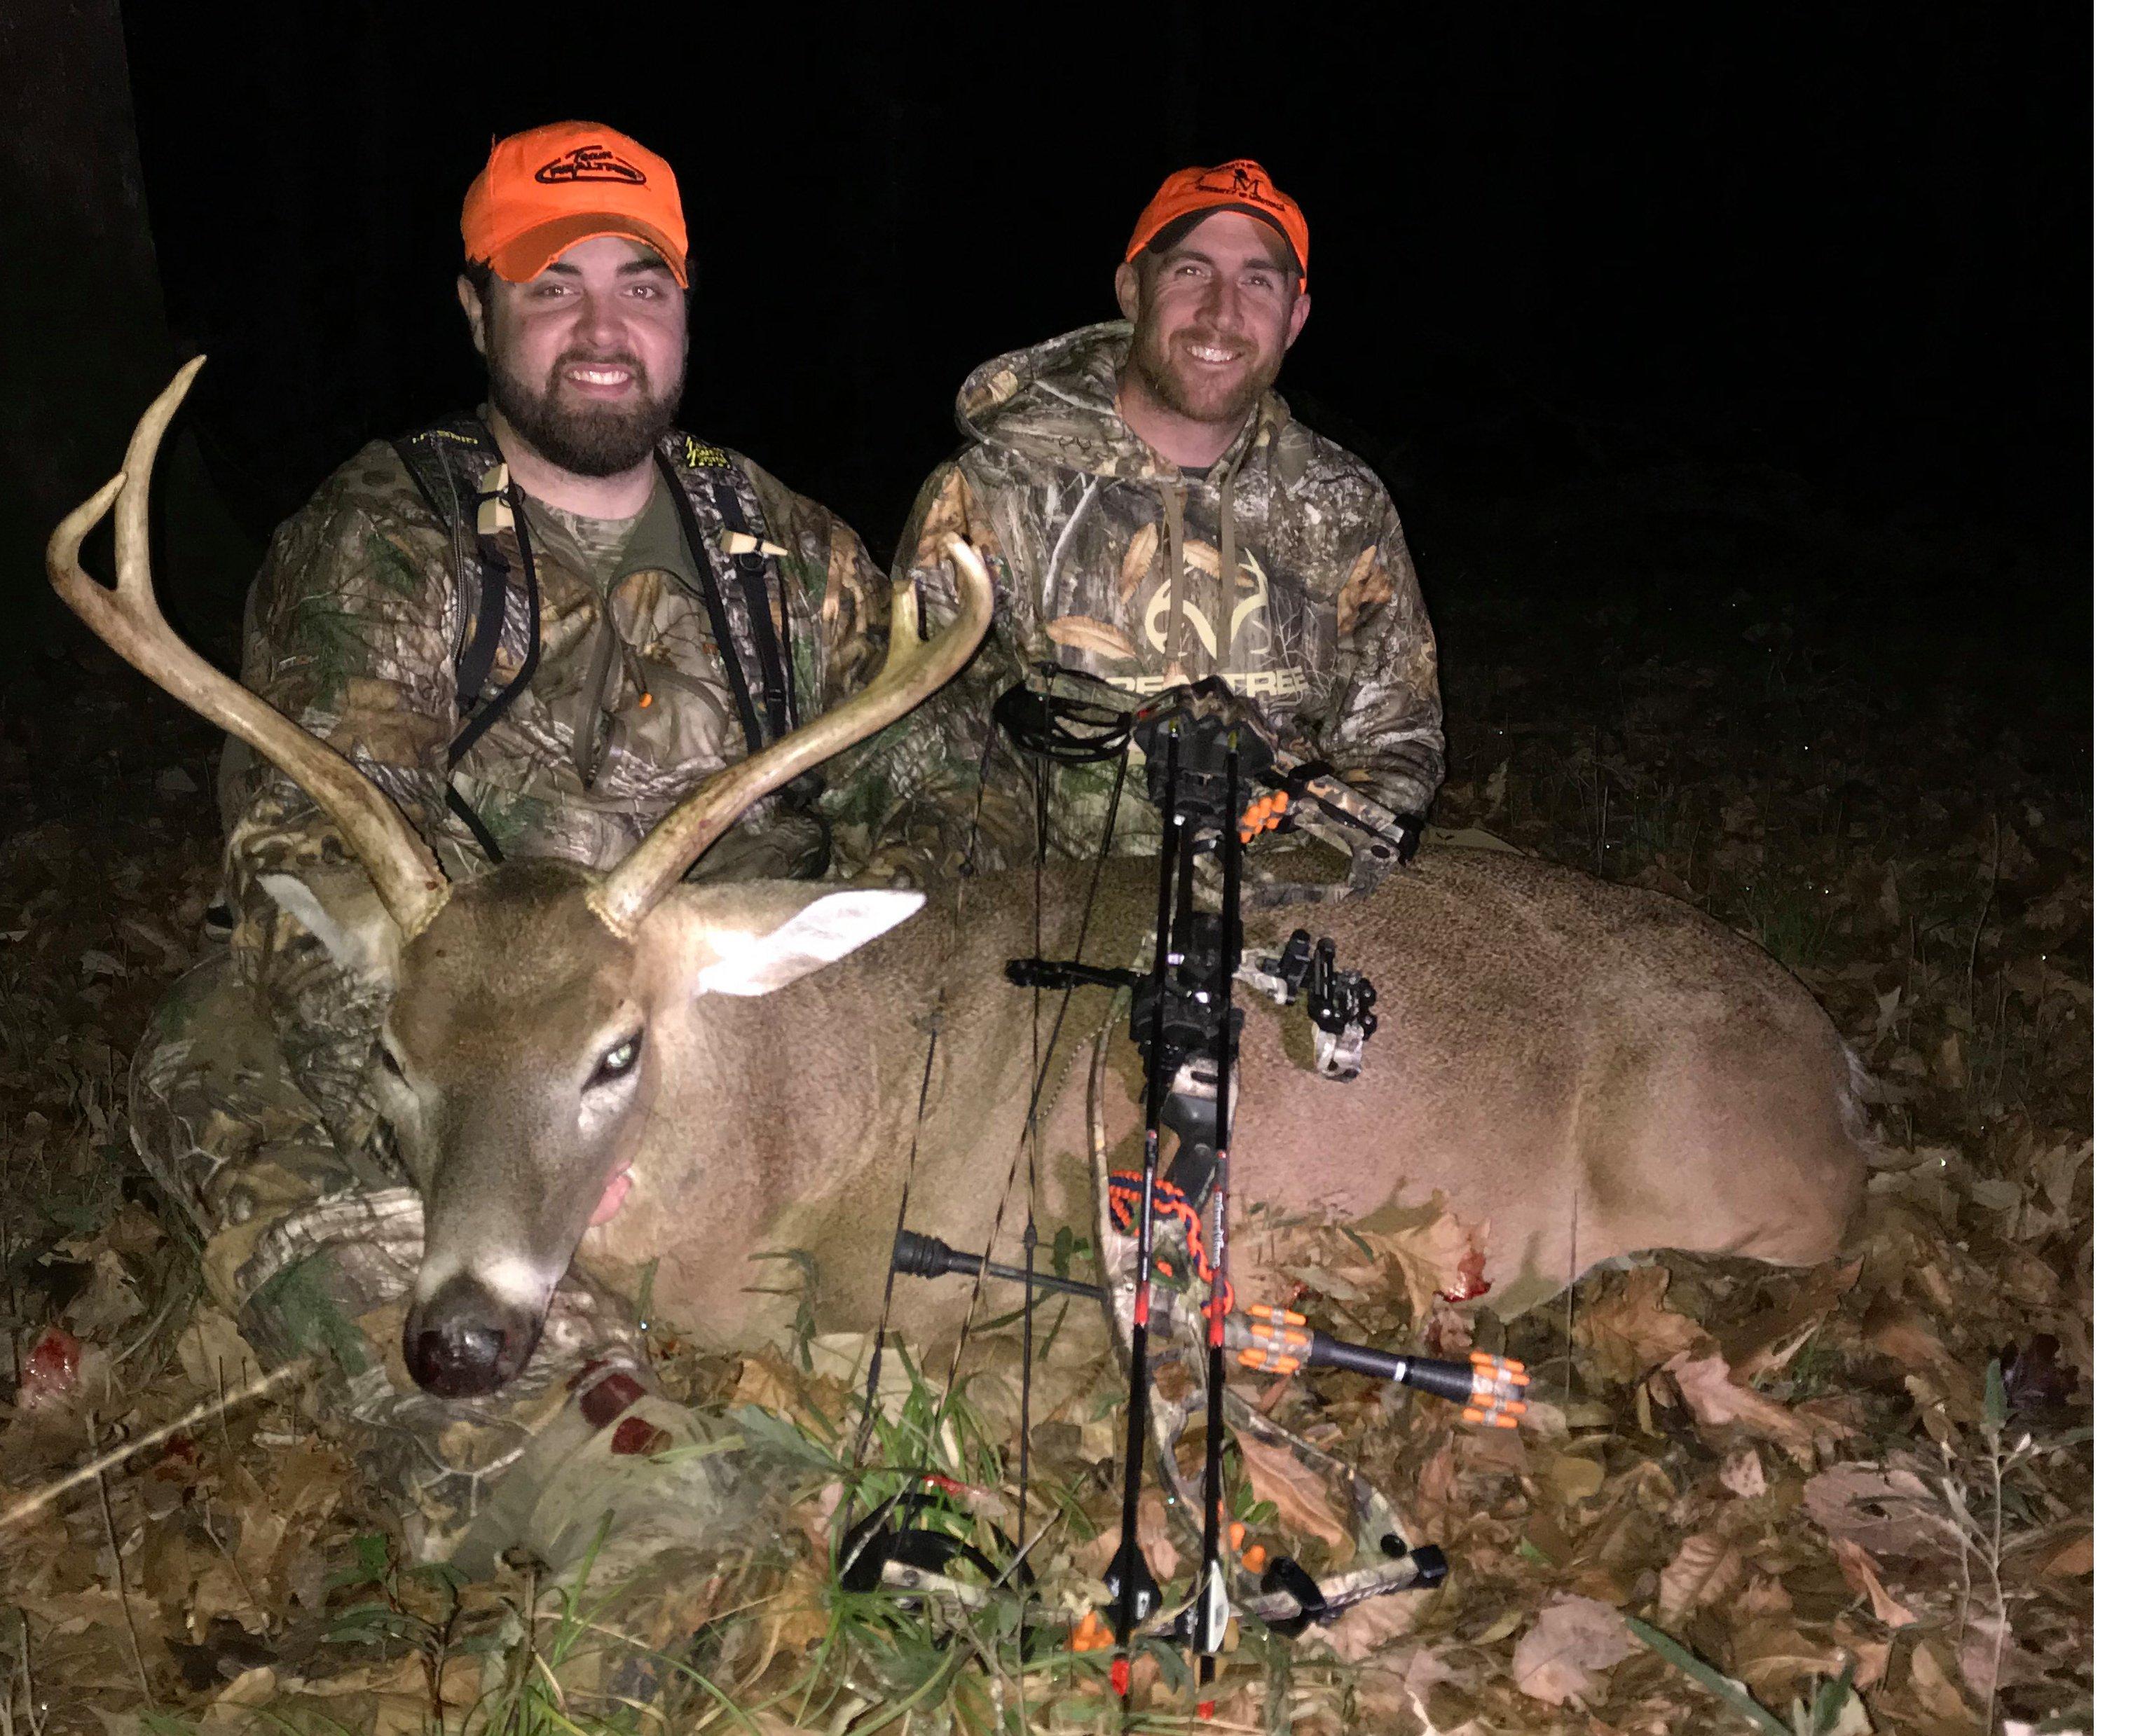 Garret Deavers, a senior with the President's Outdoor Scholars Program, and Kyle Barefield, program sponsor and host of All Things Hunting, show off a deer taken by Deavers. -- Image provided by President's Outdoor Scholars Program